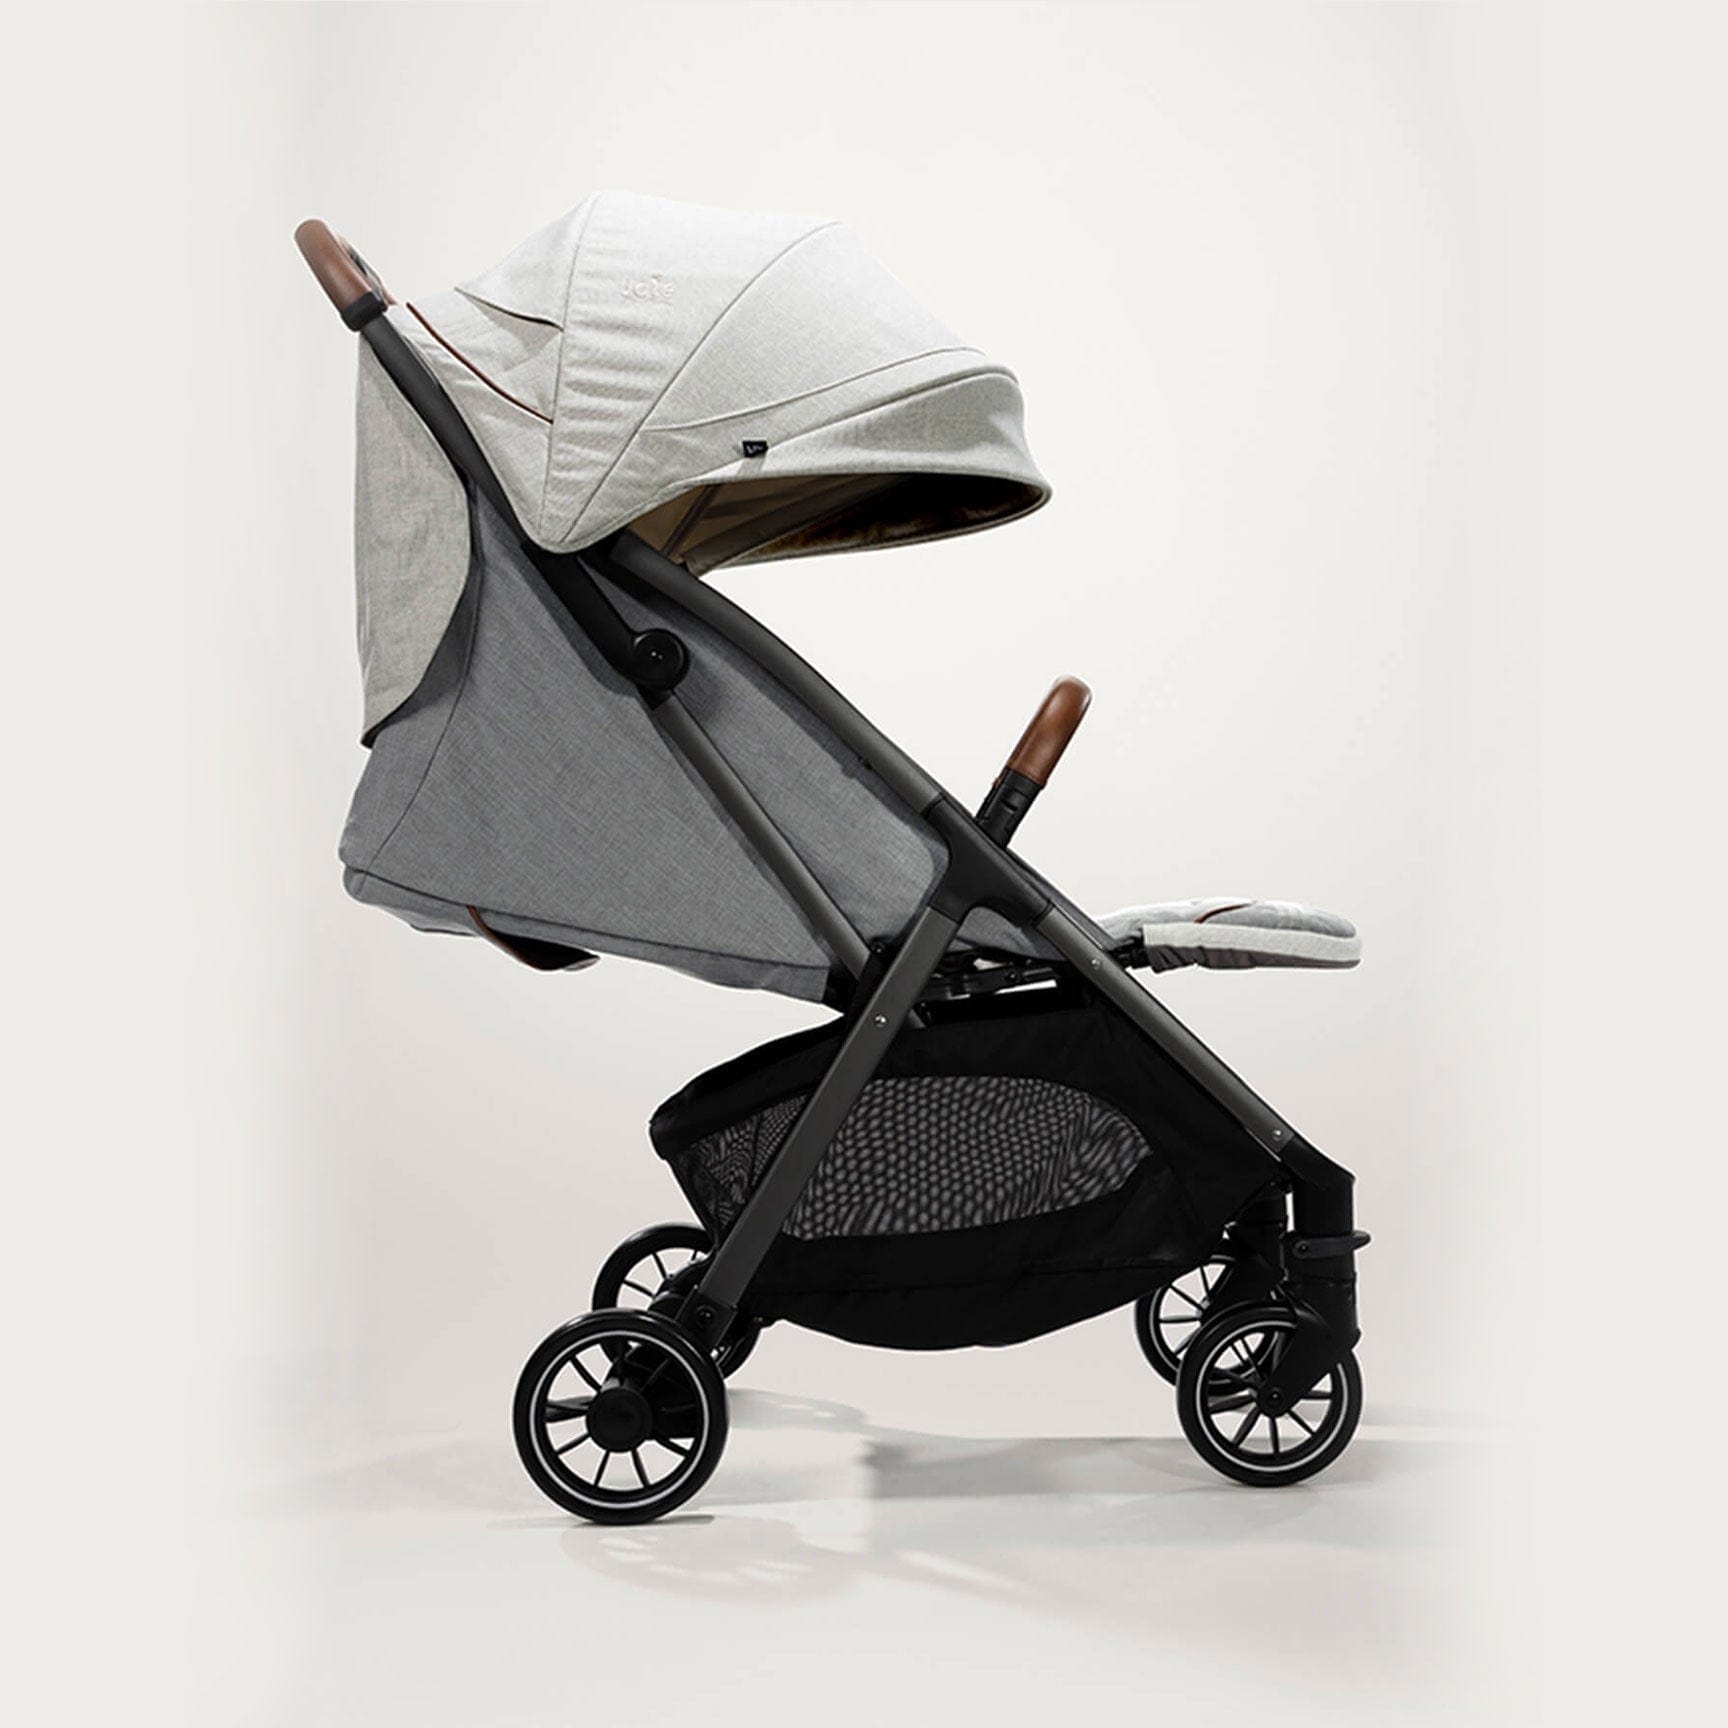 Joie Pushchairs & Buggies Joie Parcel Signature Stroller - Oyster S2112AAOYS000